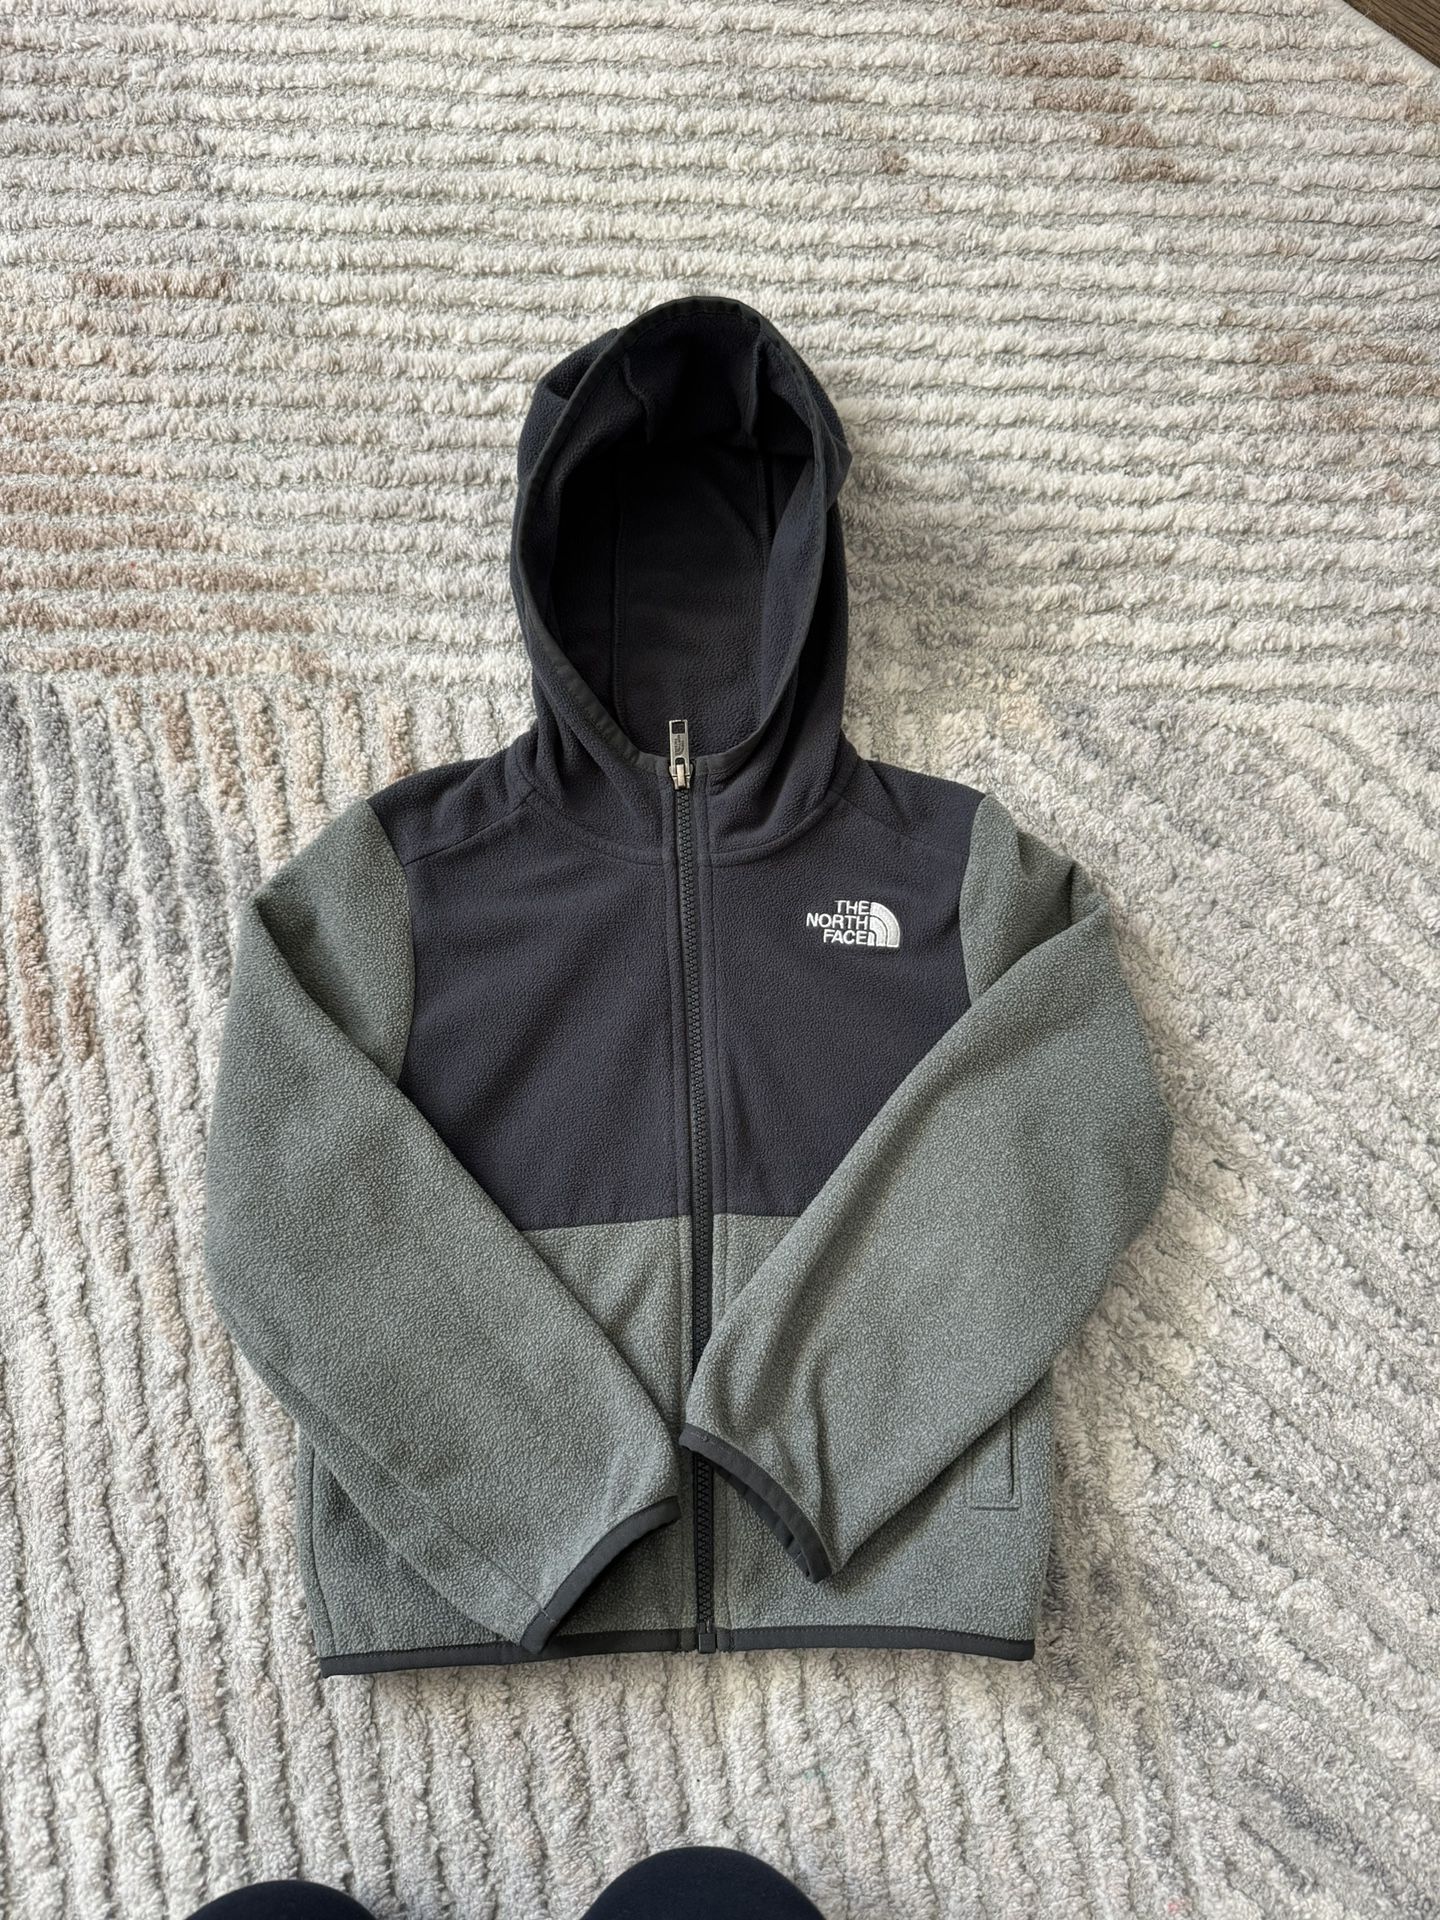 The North Face/ Fleece Jacket-size XS For Kids 